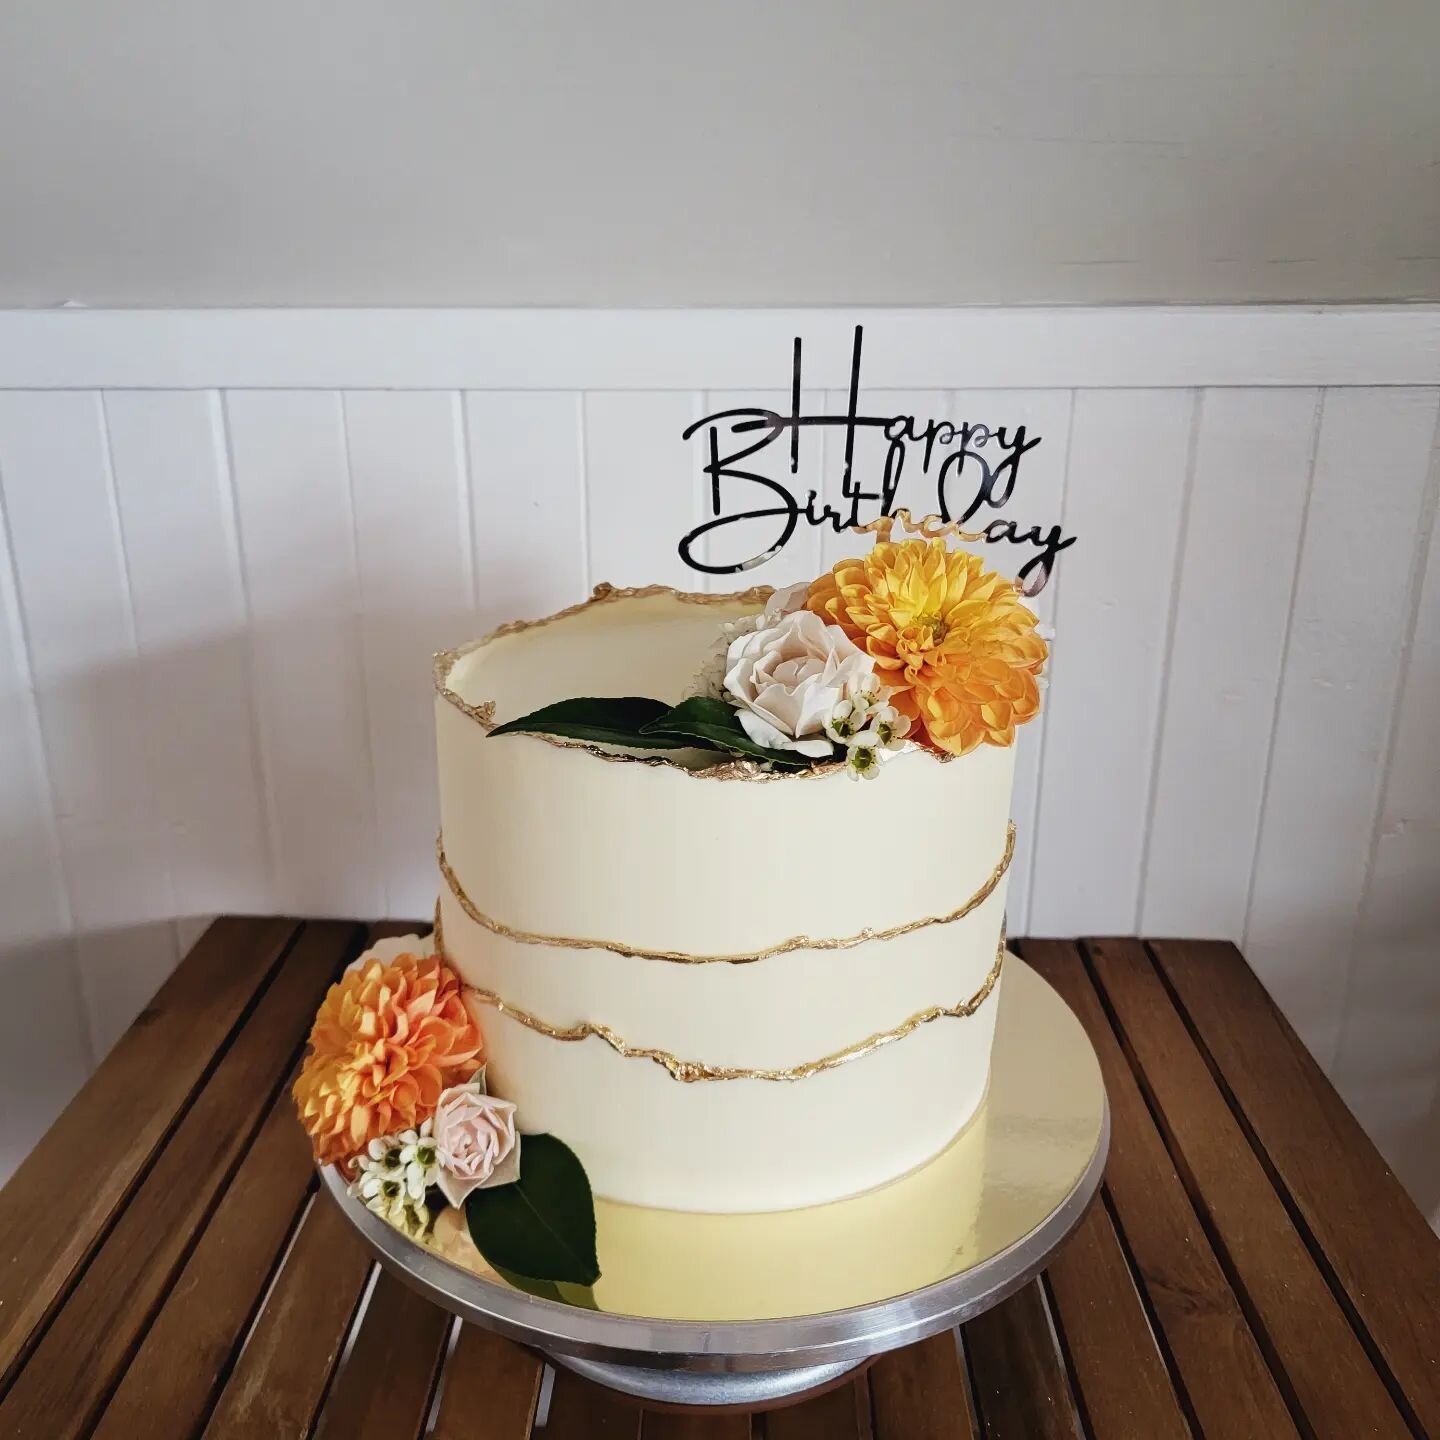 Pure Elegant

Tender Vanilla Cake Layers filled with Fresh Raspberry Compote and covered in Whipped Vanilla Buttercream. Decorated with Edible Gold and Fresh Flowers from @mumsflowersmt 

#vanillacake #raspberrycompote #raspberryandvanilla #vanilla #